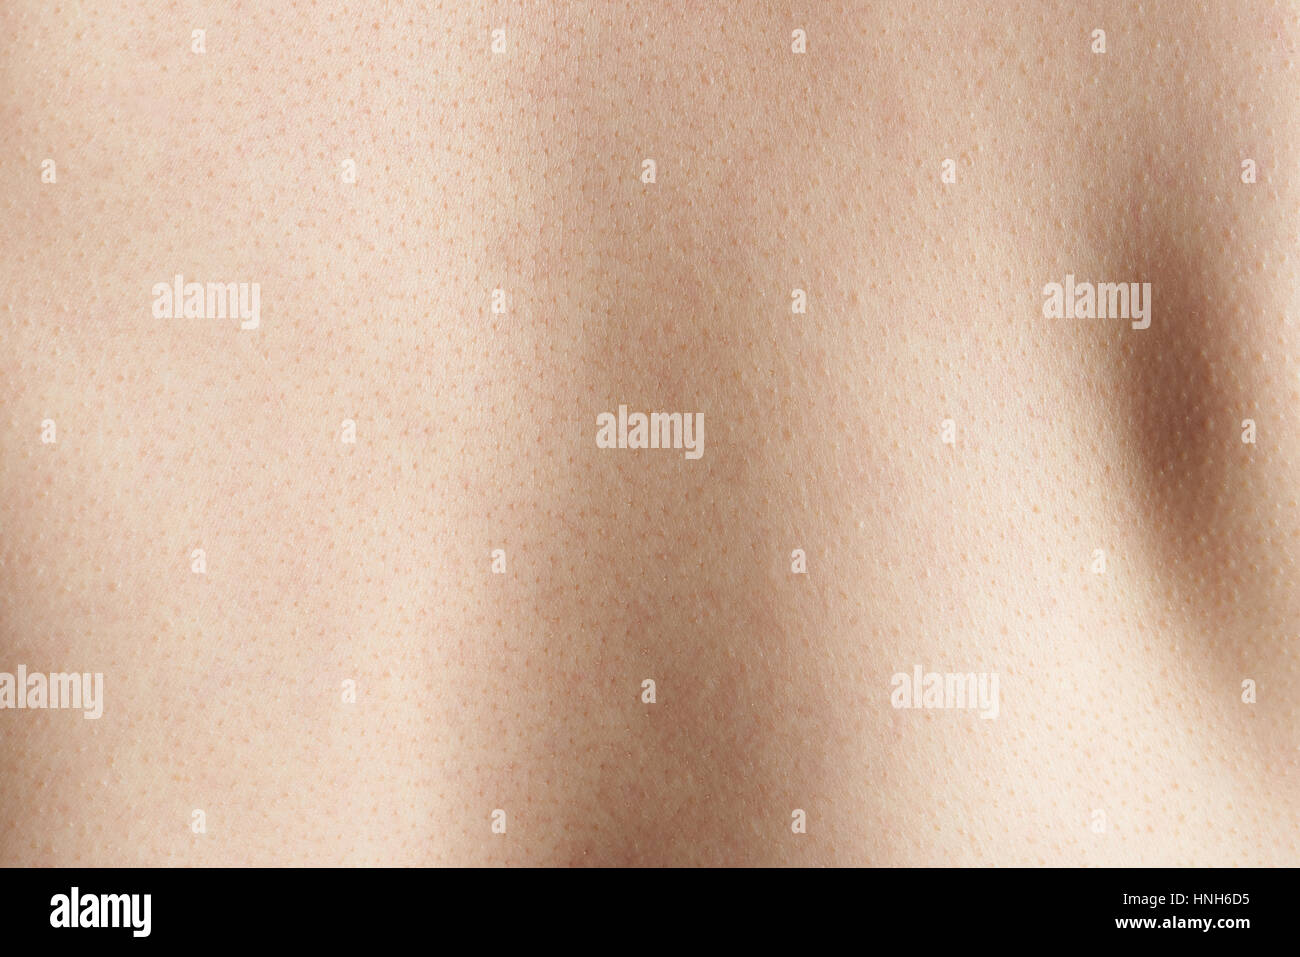 Clean skin texture background of human back. Close up skin on man body Stock Photo